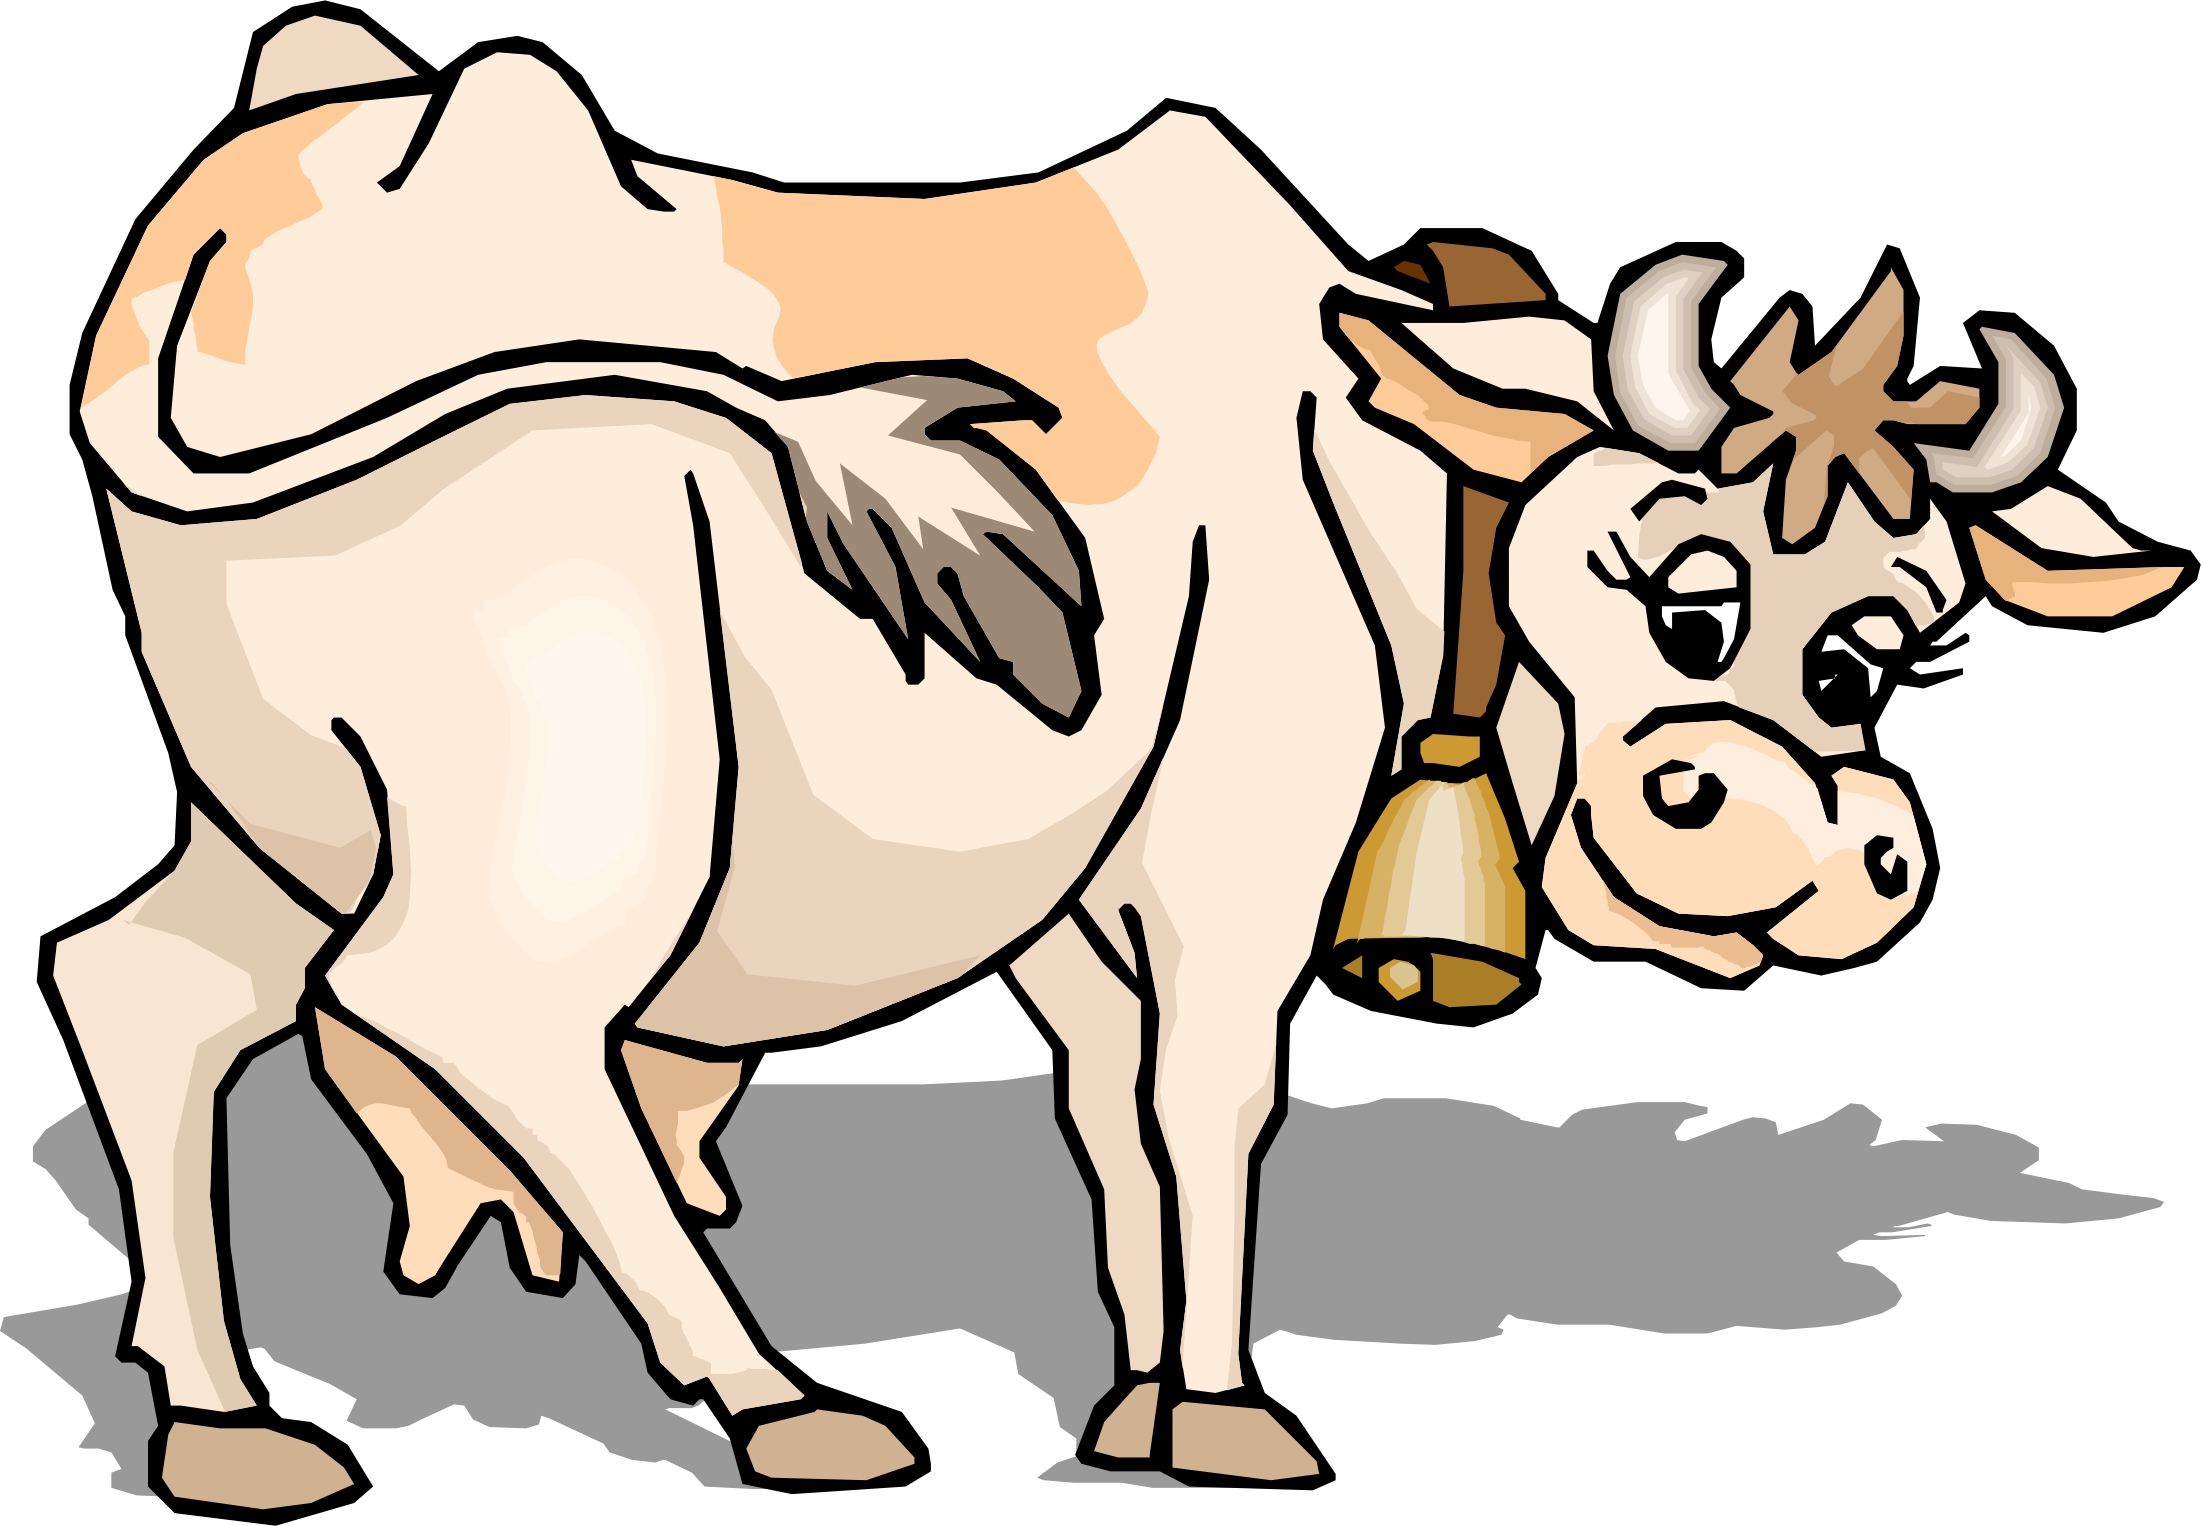 Cow Cartoon Characters - ClipArt Best